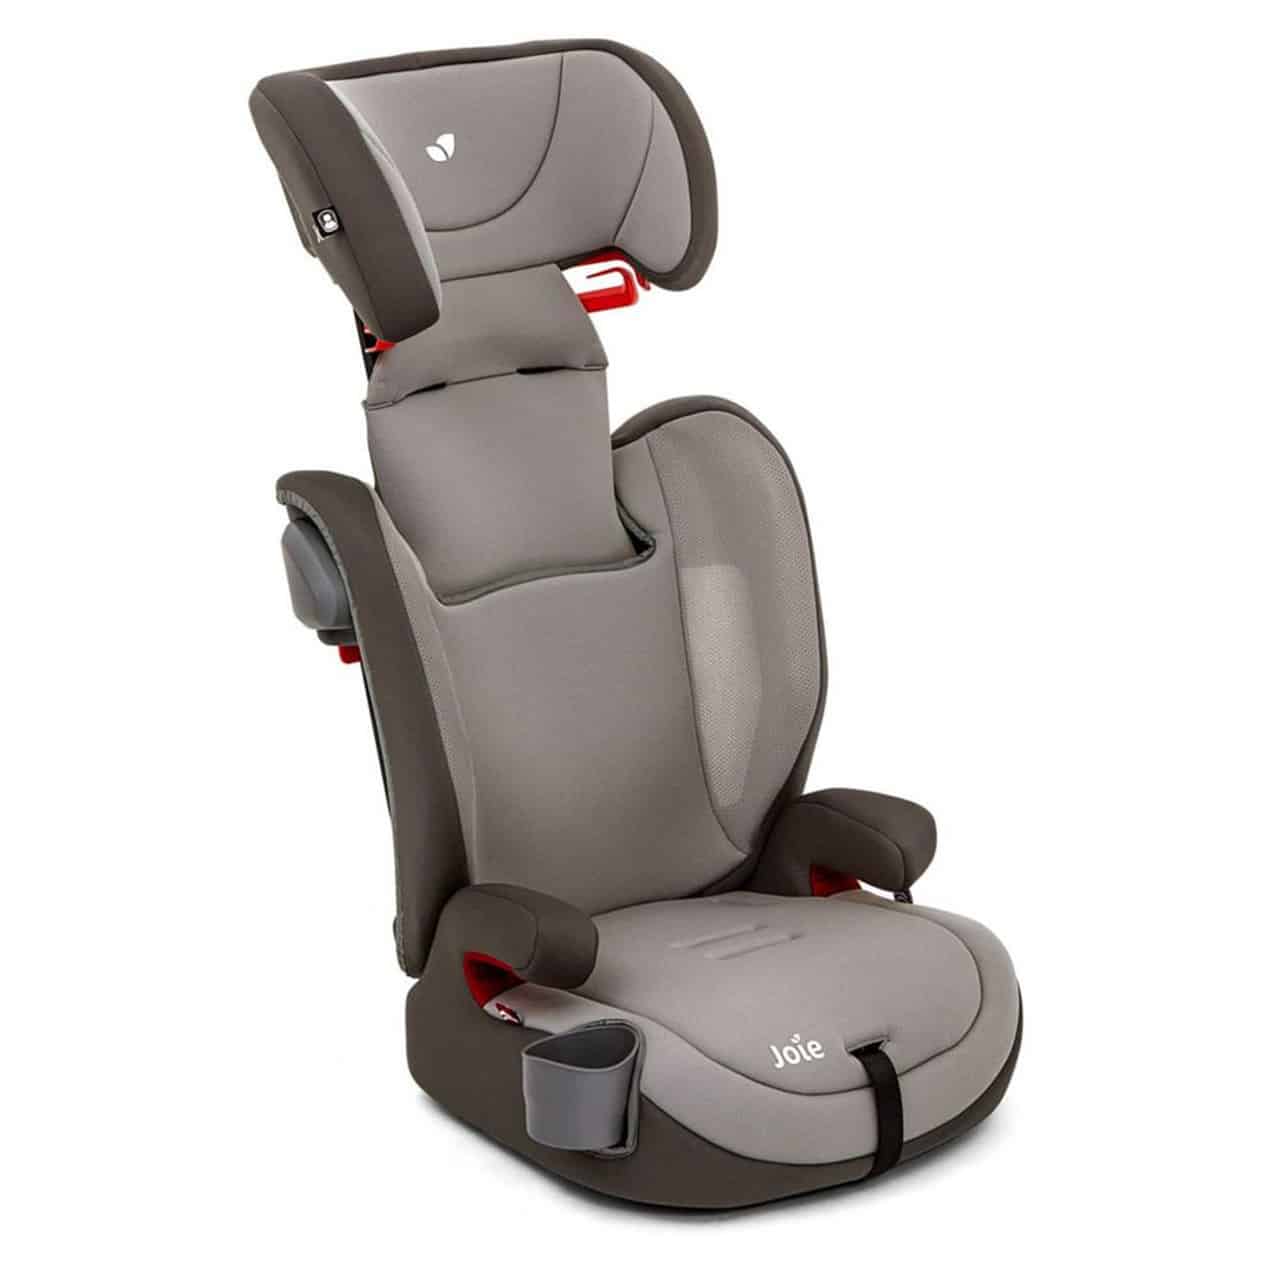 Joie Trillo Shield 1/2/3 Car Seat - Ember